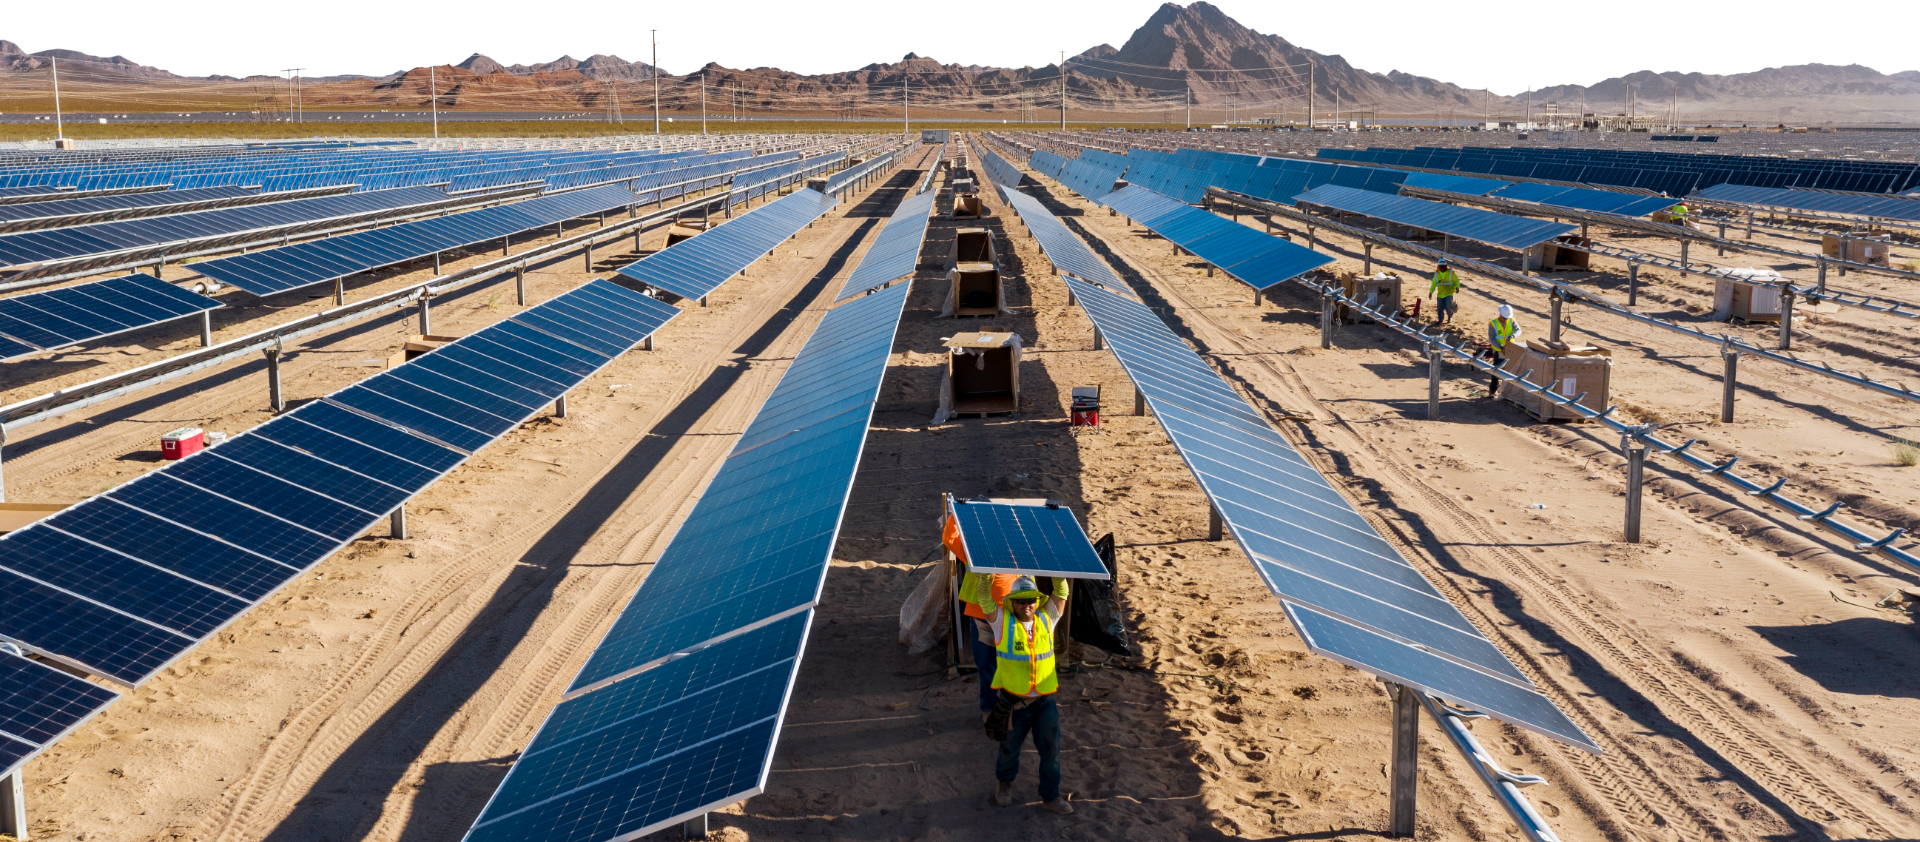 An array of solar panels being installed in the desert